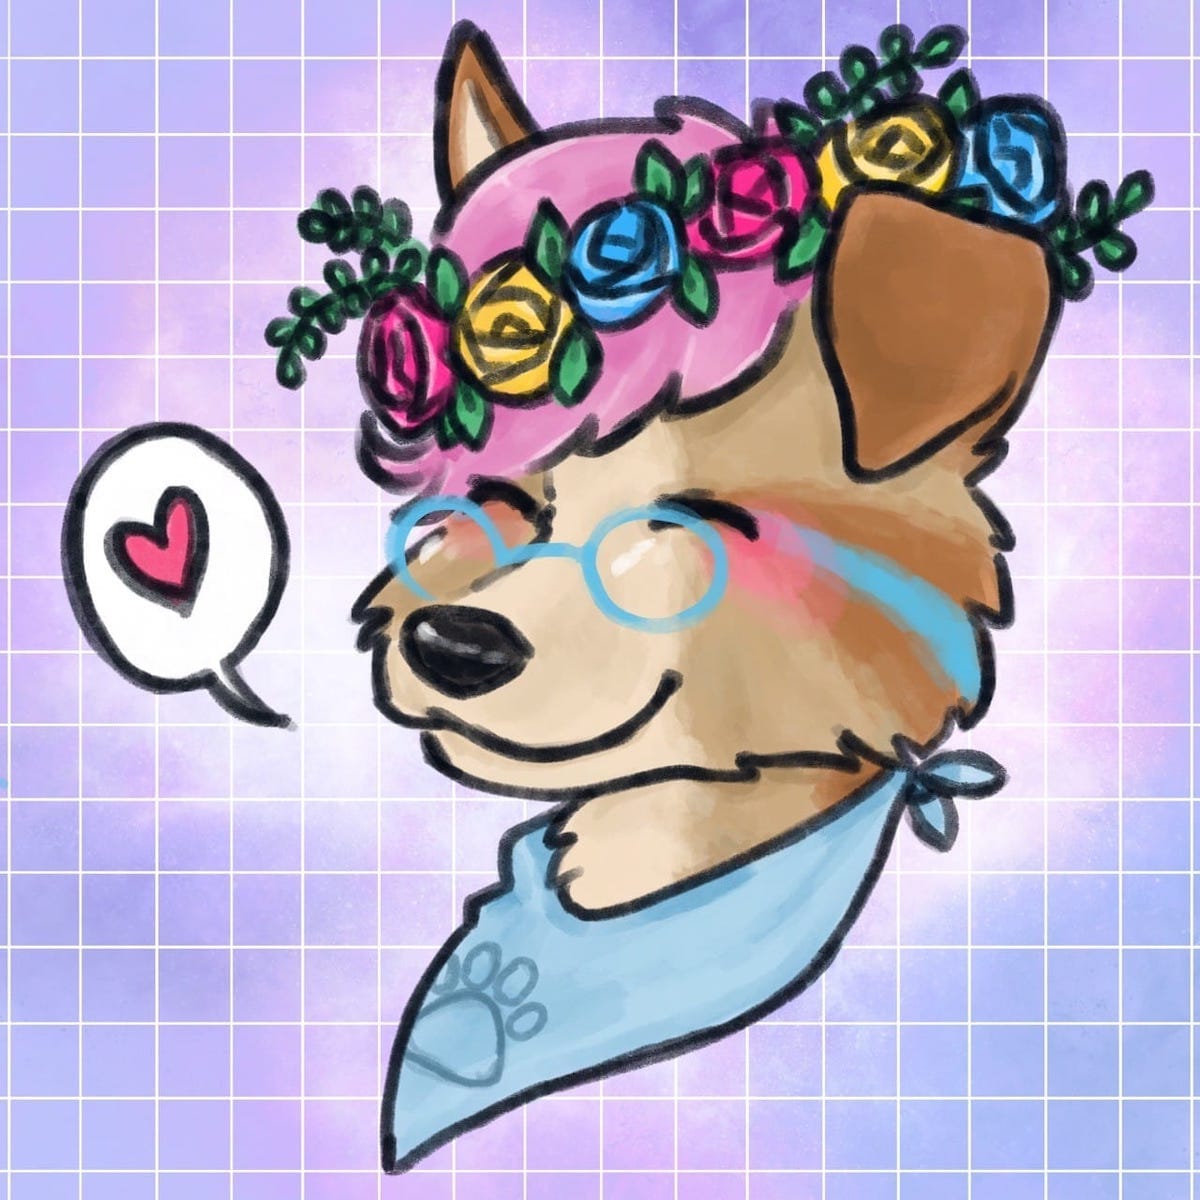 A headshot icon of Bowie with a speech bubble with a heart in it and a flower crown with pan pride colored flowers by felix sunflower